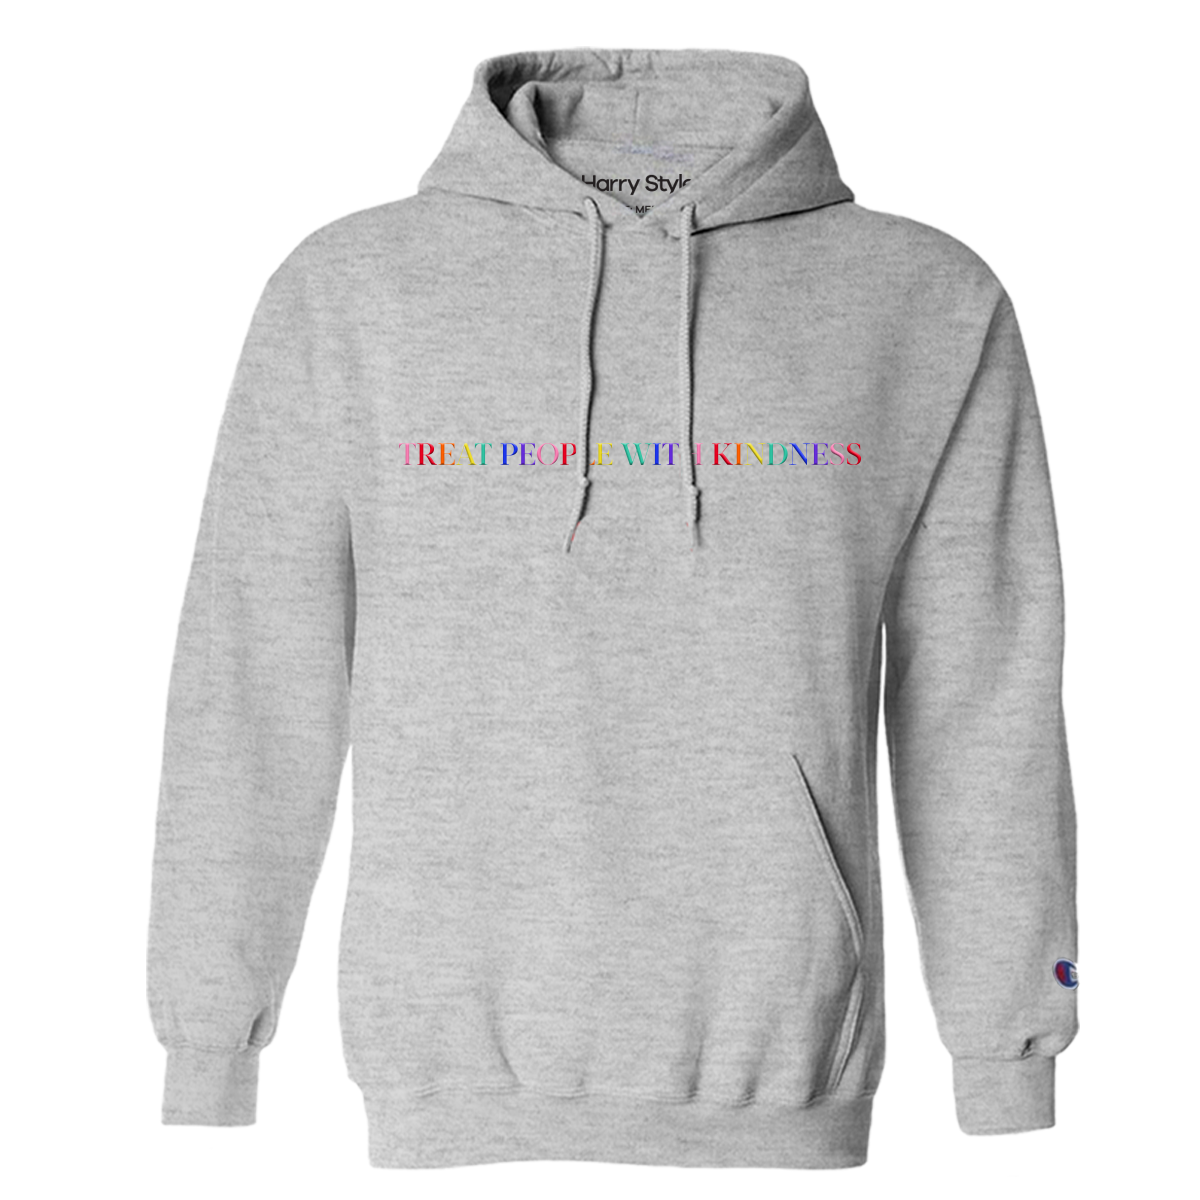 Treat People With Kindness Hoodie (Grey)